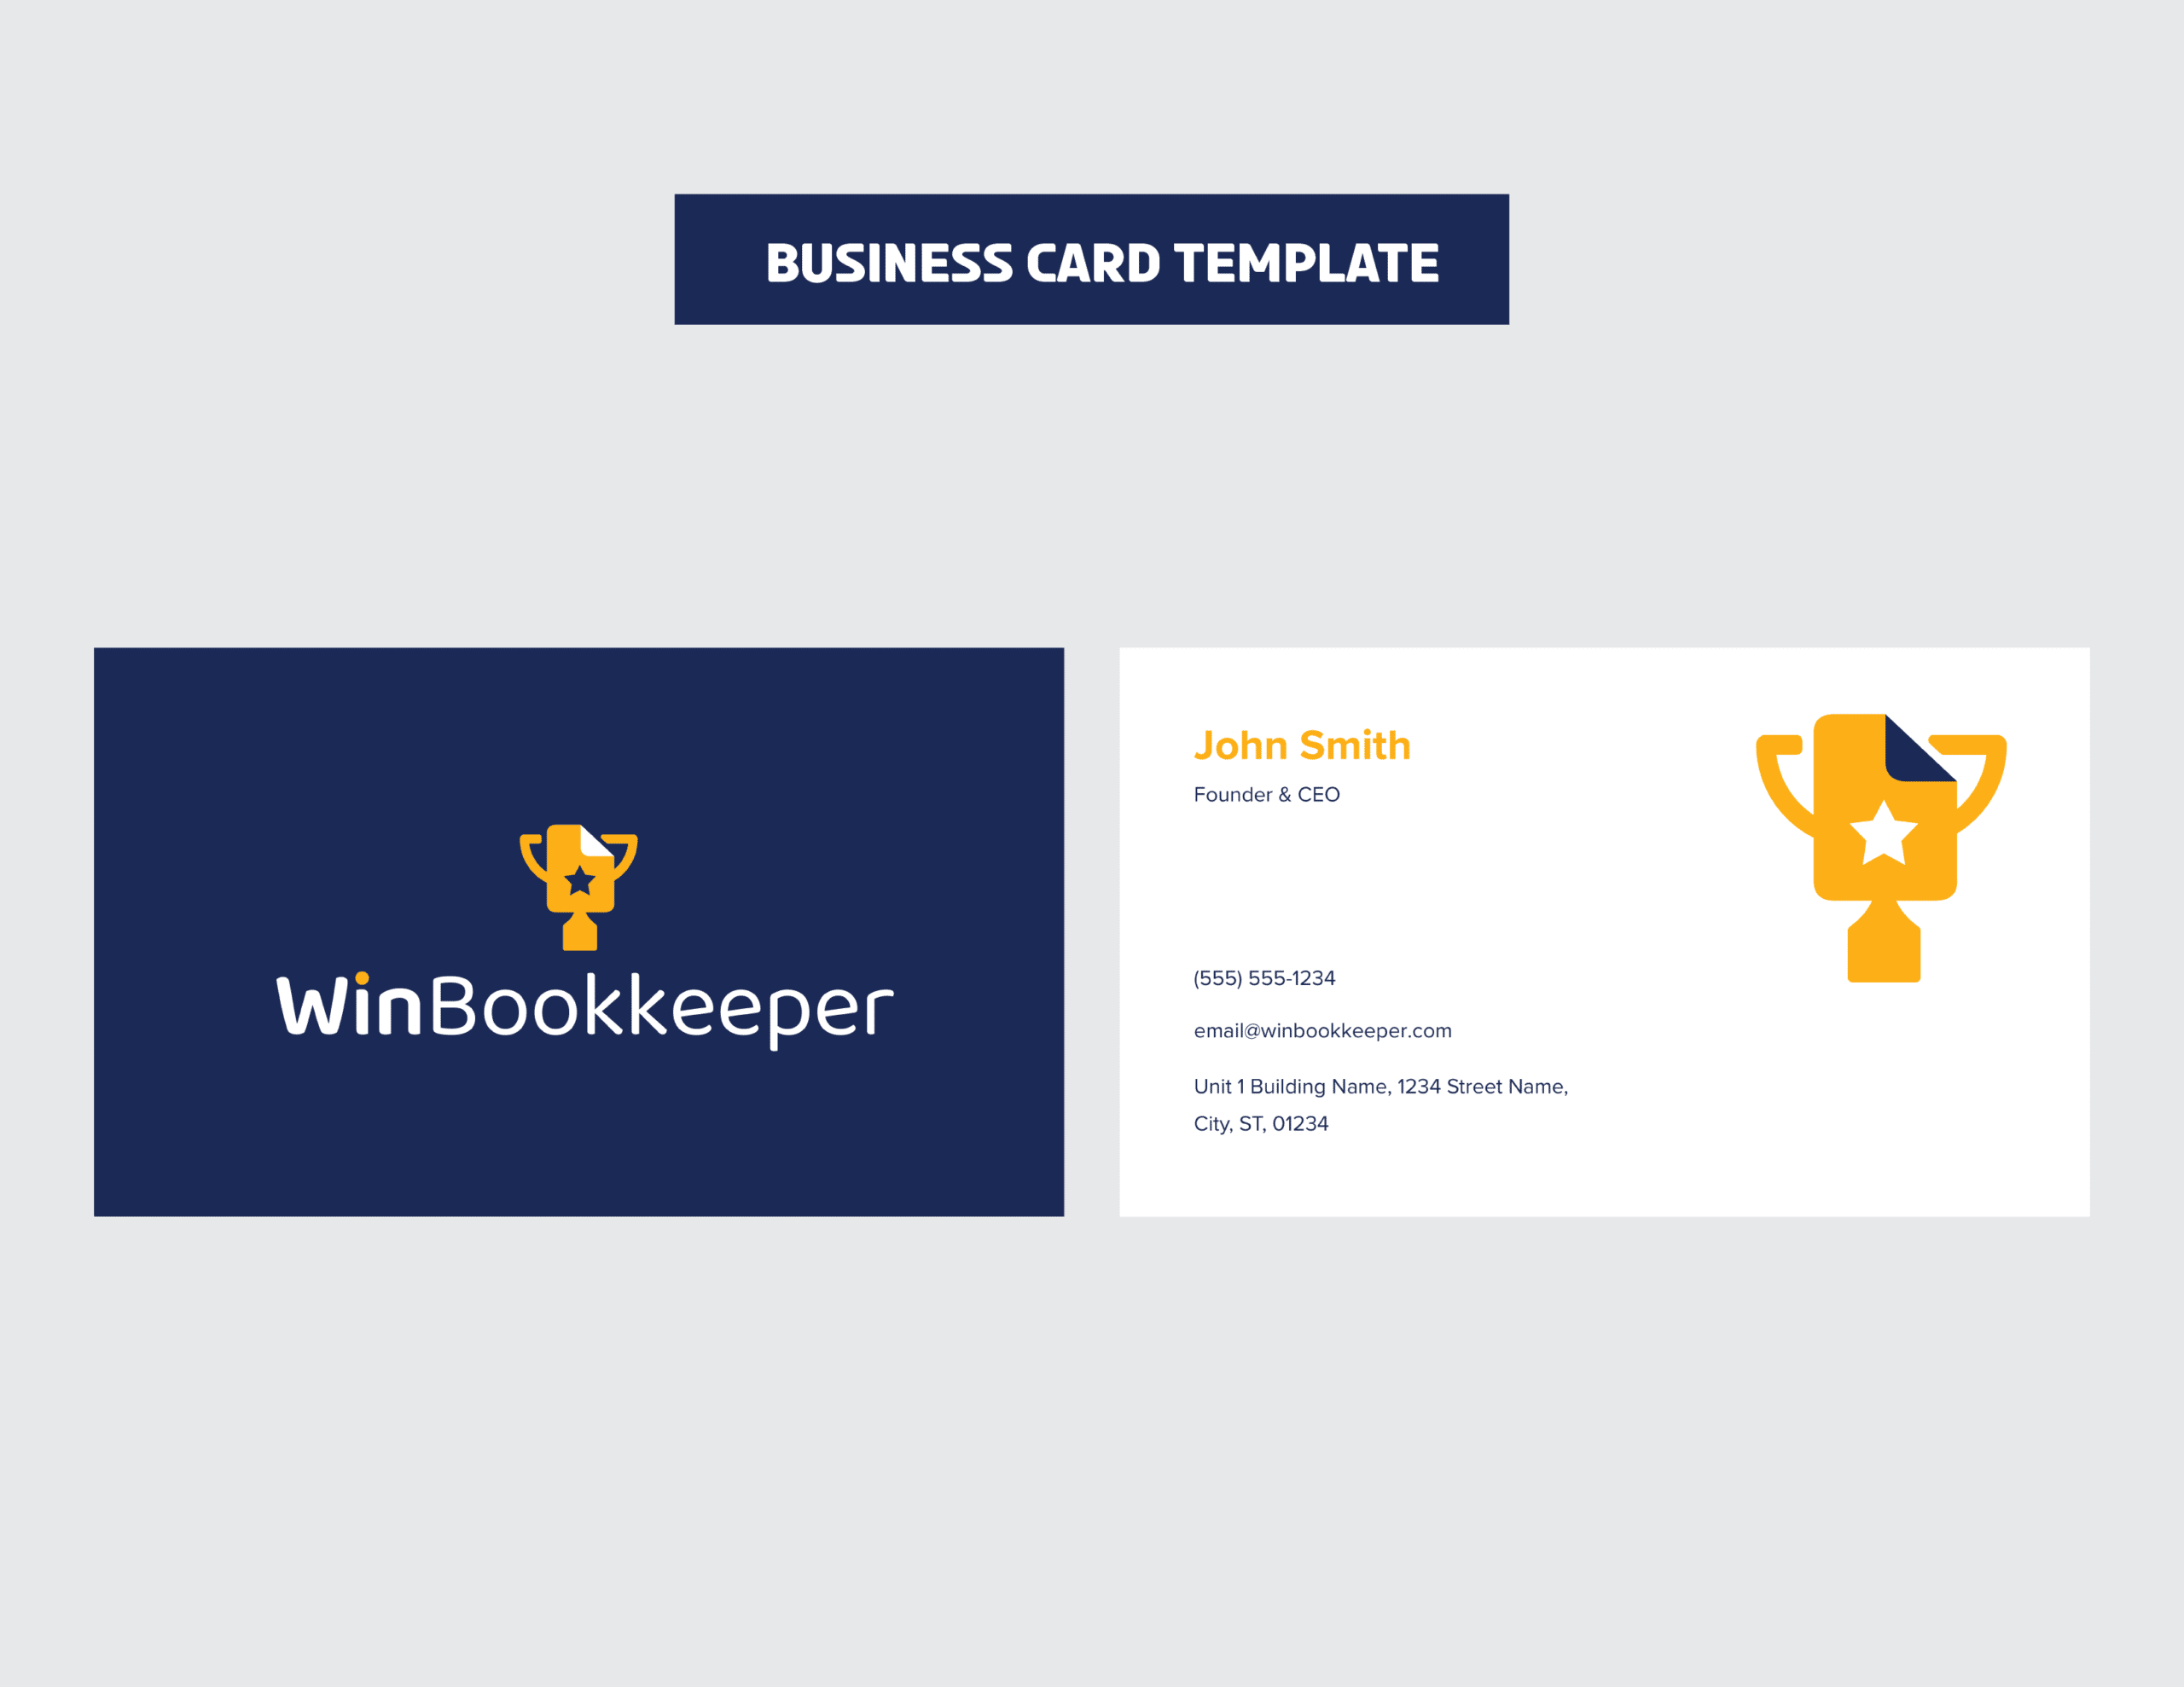 04_WinBookkeeper_Business Card Template